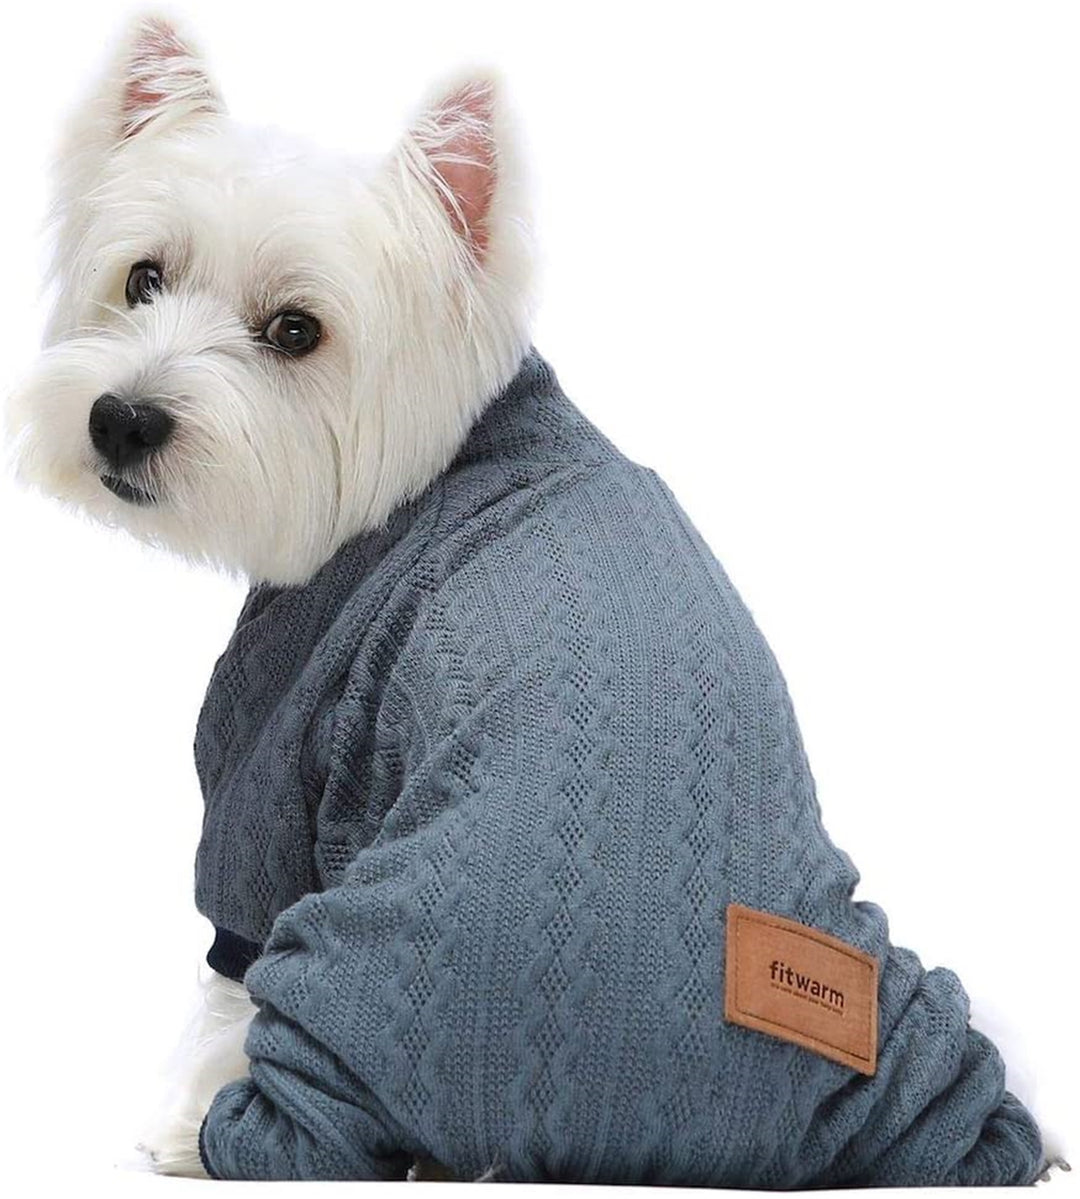 Turtleneck Knitted pet clothes